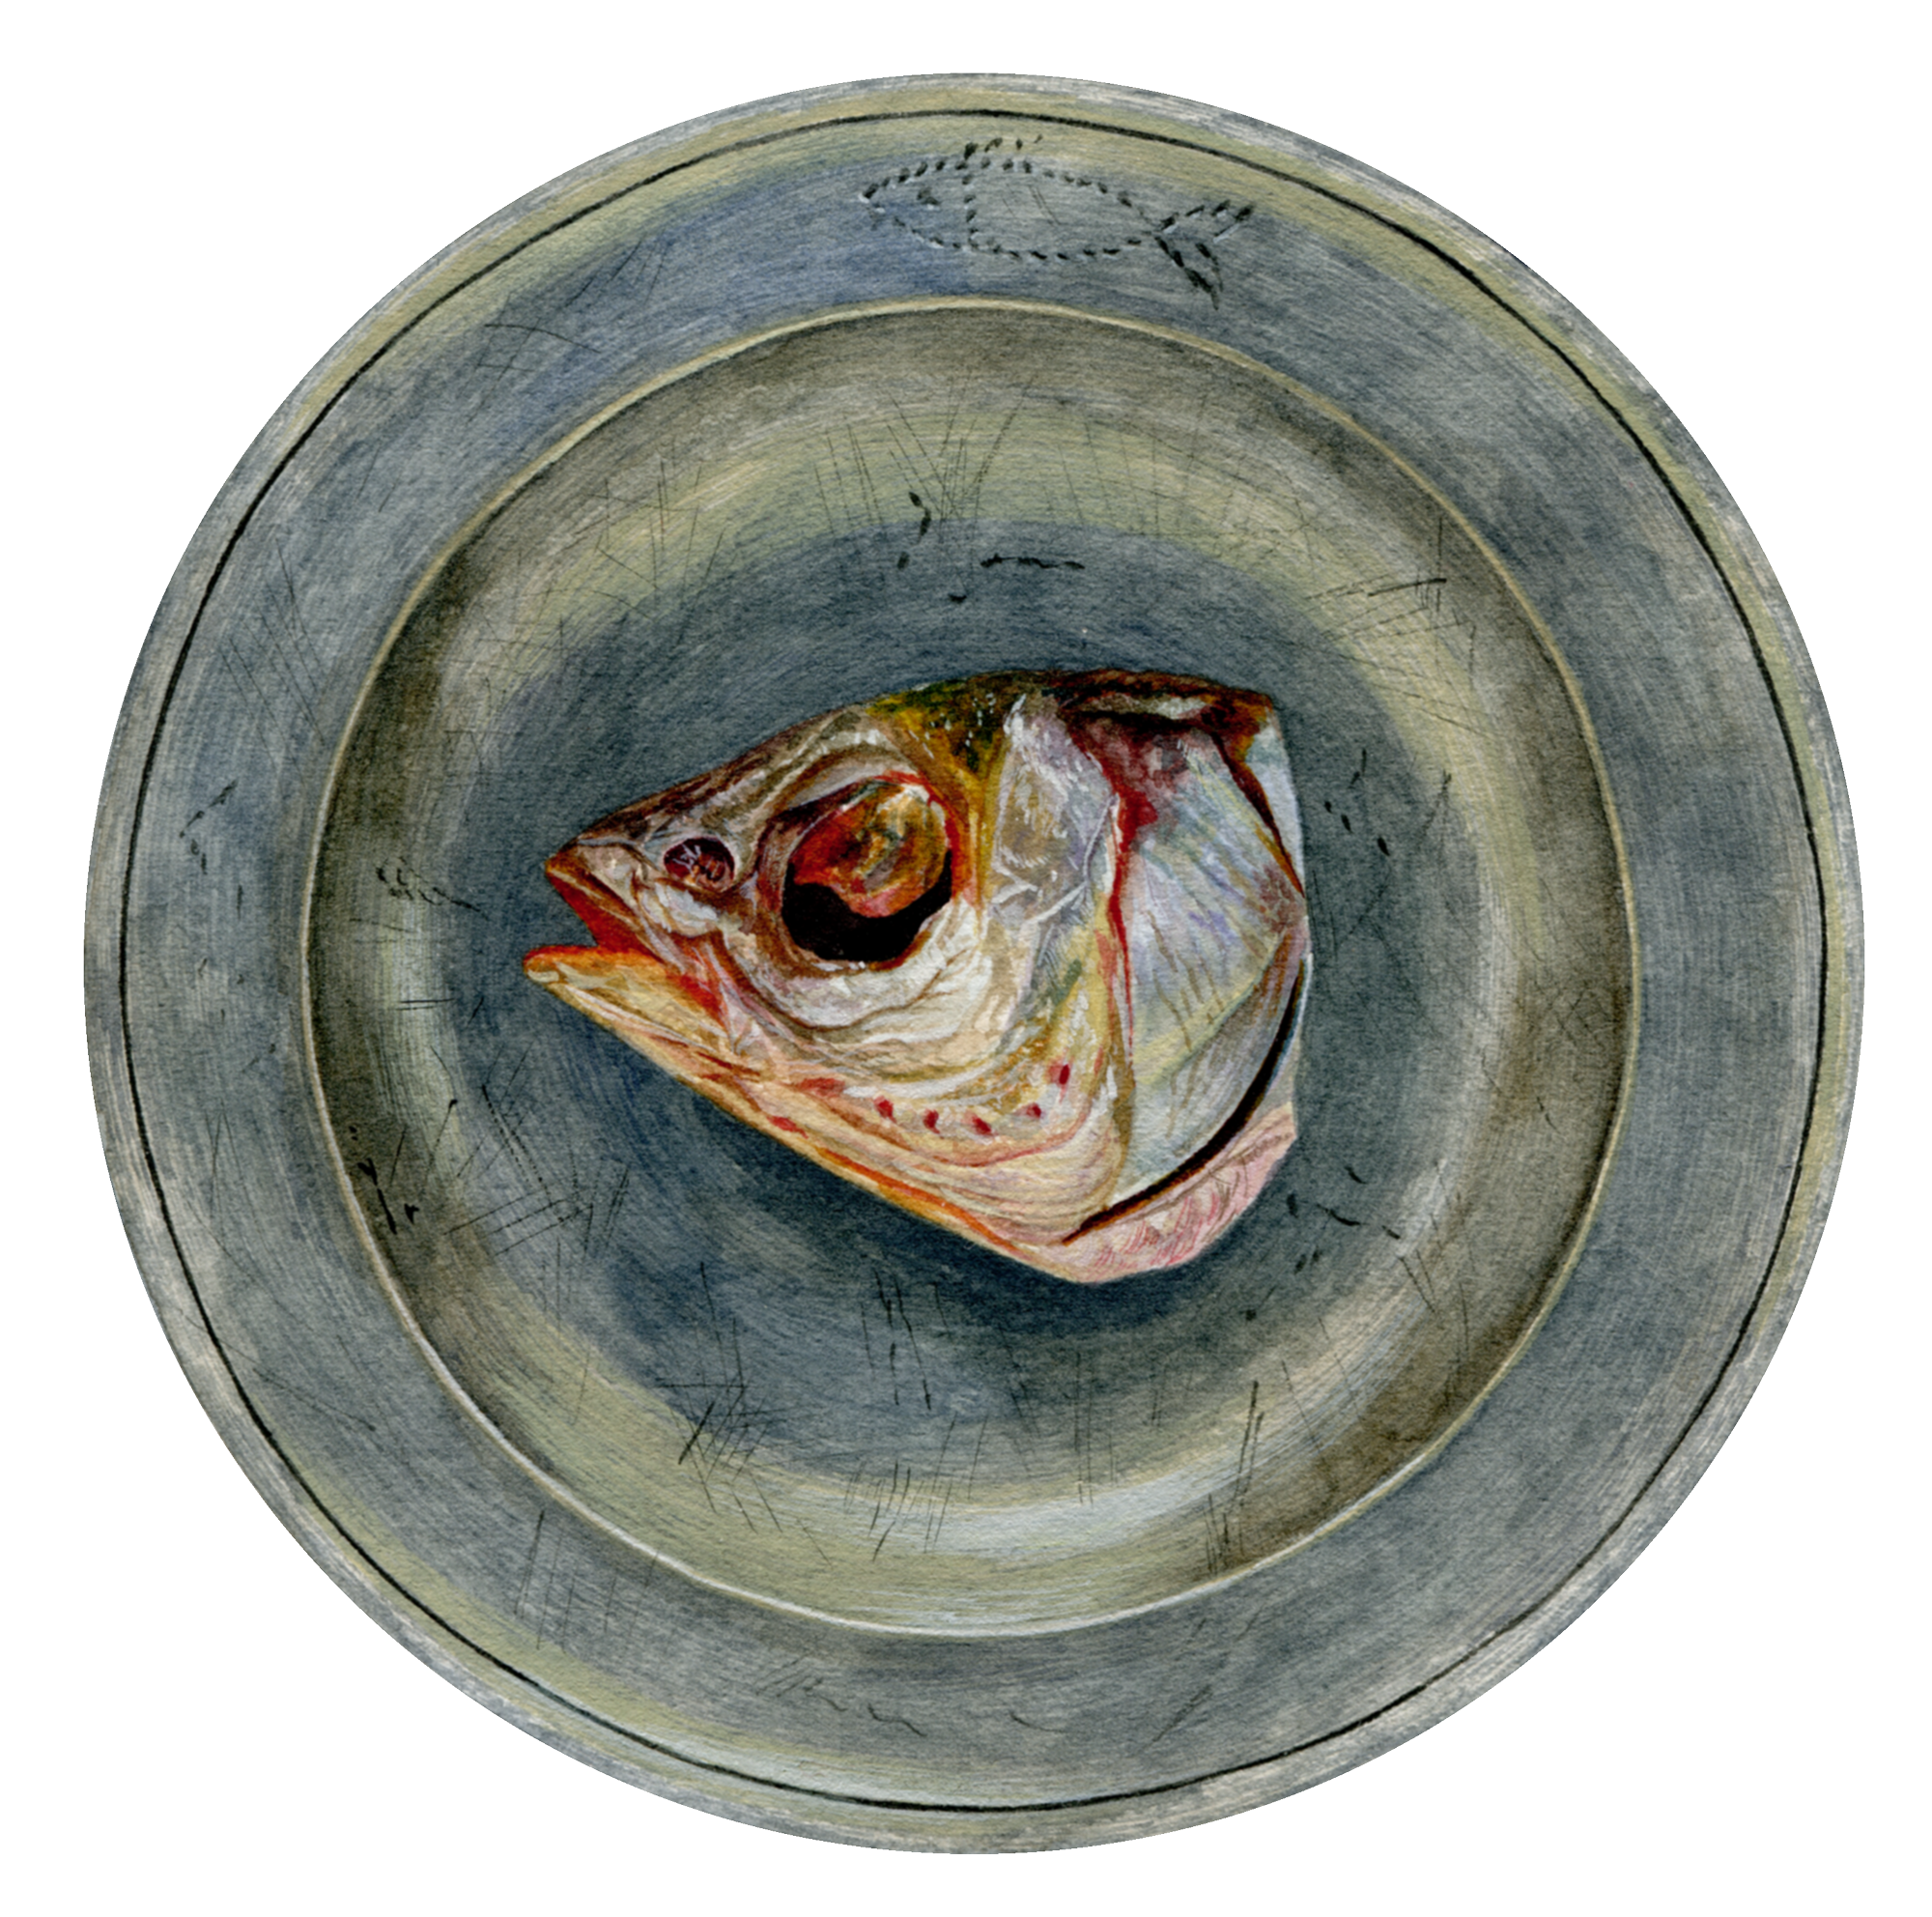 A severed, bloodied fish head on a plate